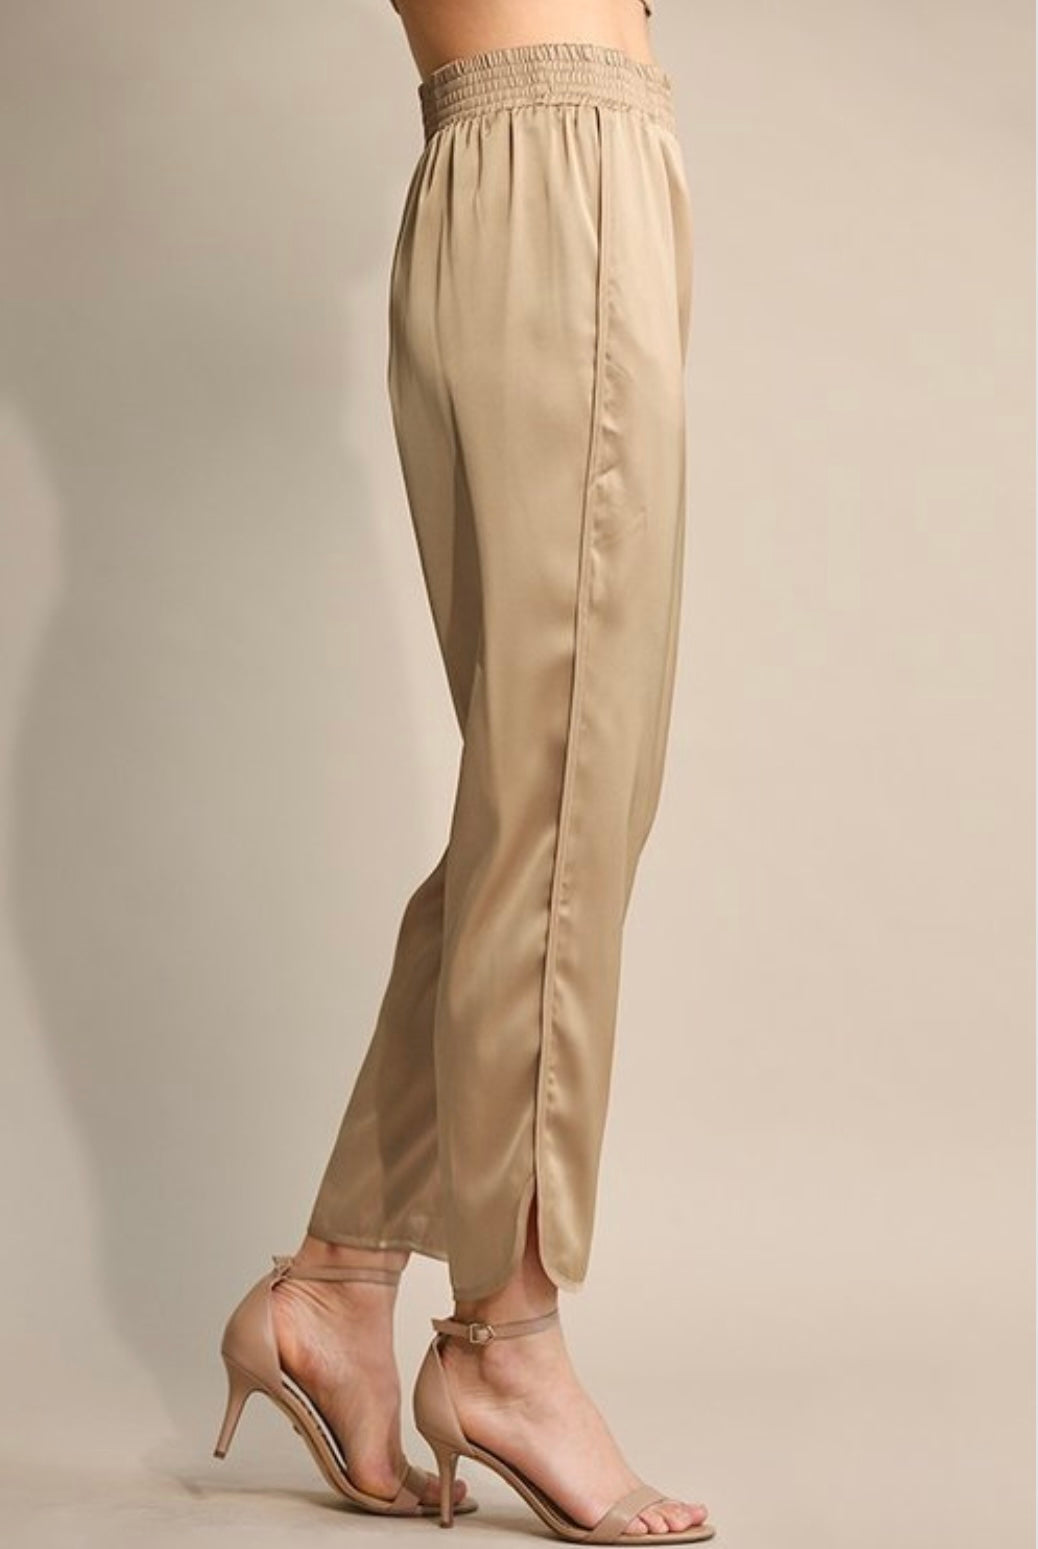 Sierra Satin Pants - Corinne Boutique Family Owned and Operated USA